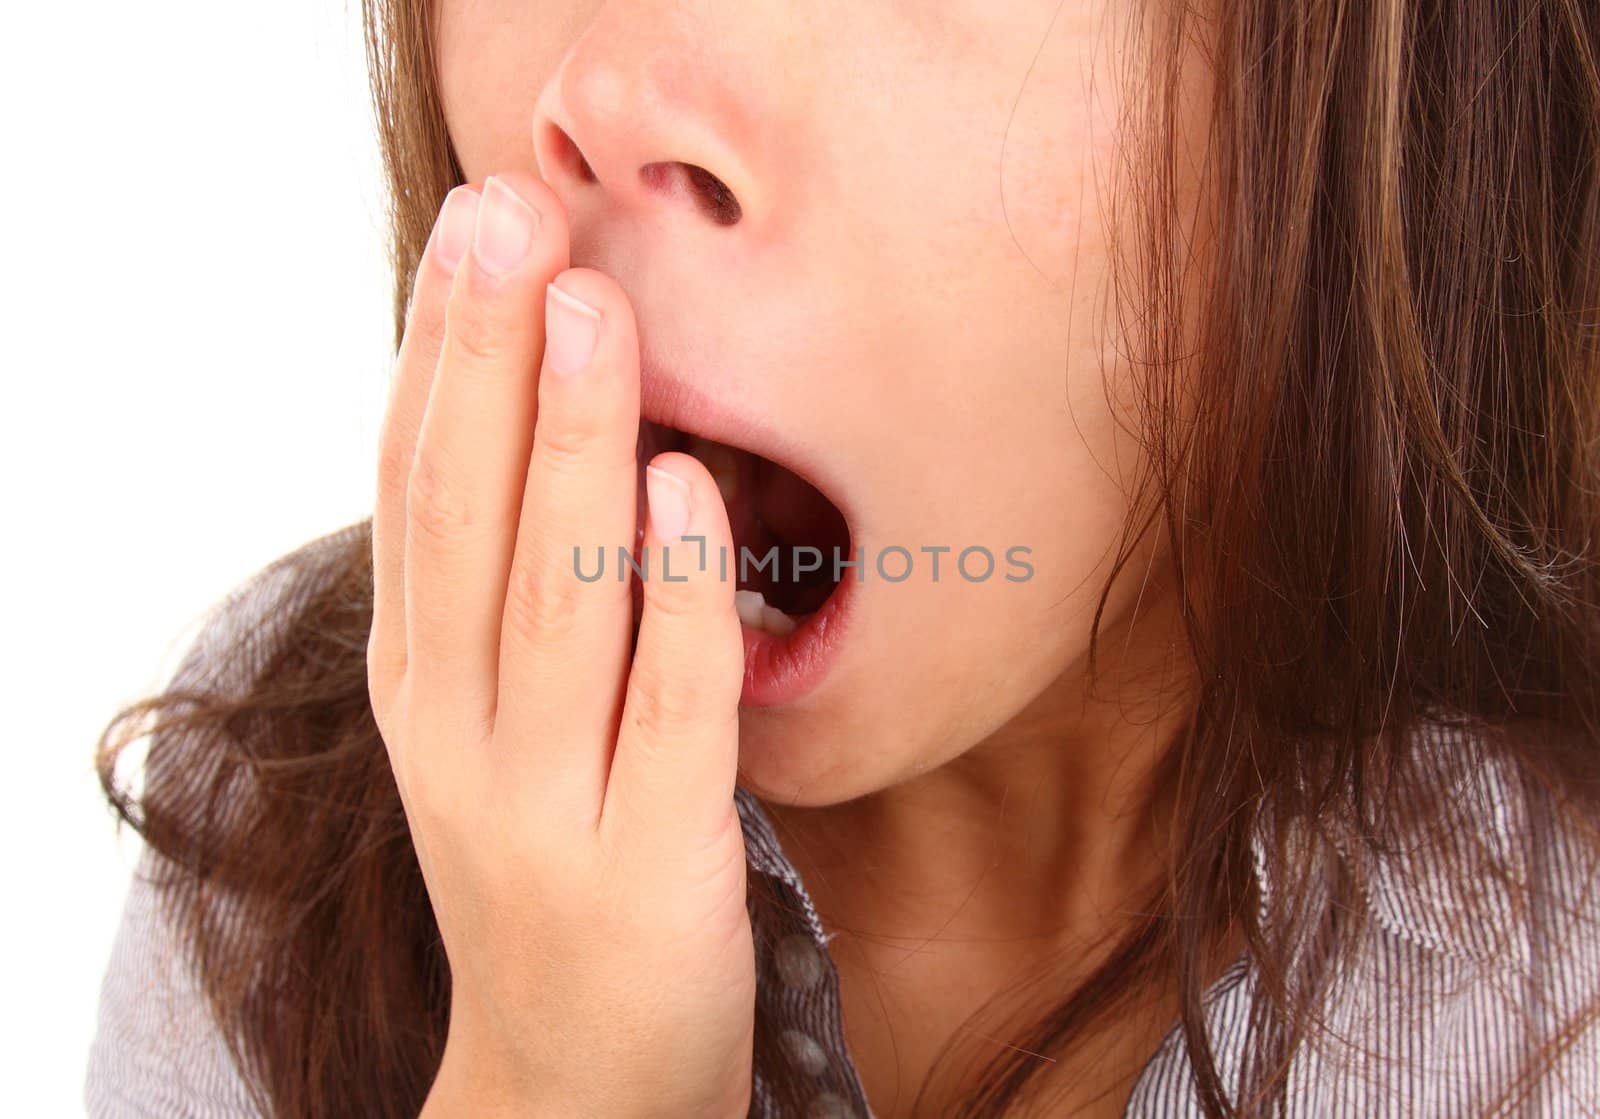 Tired woman yawning holding her hand in front of the mouth.